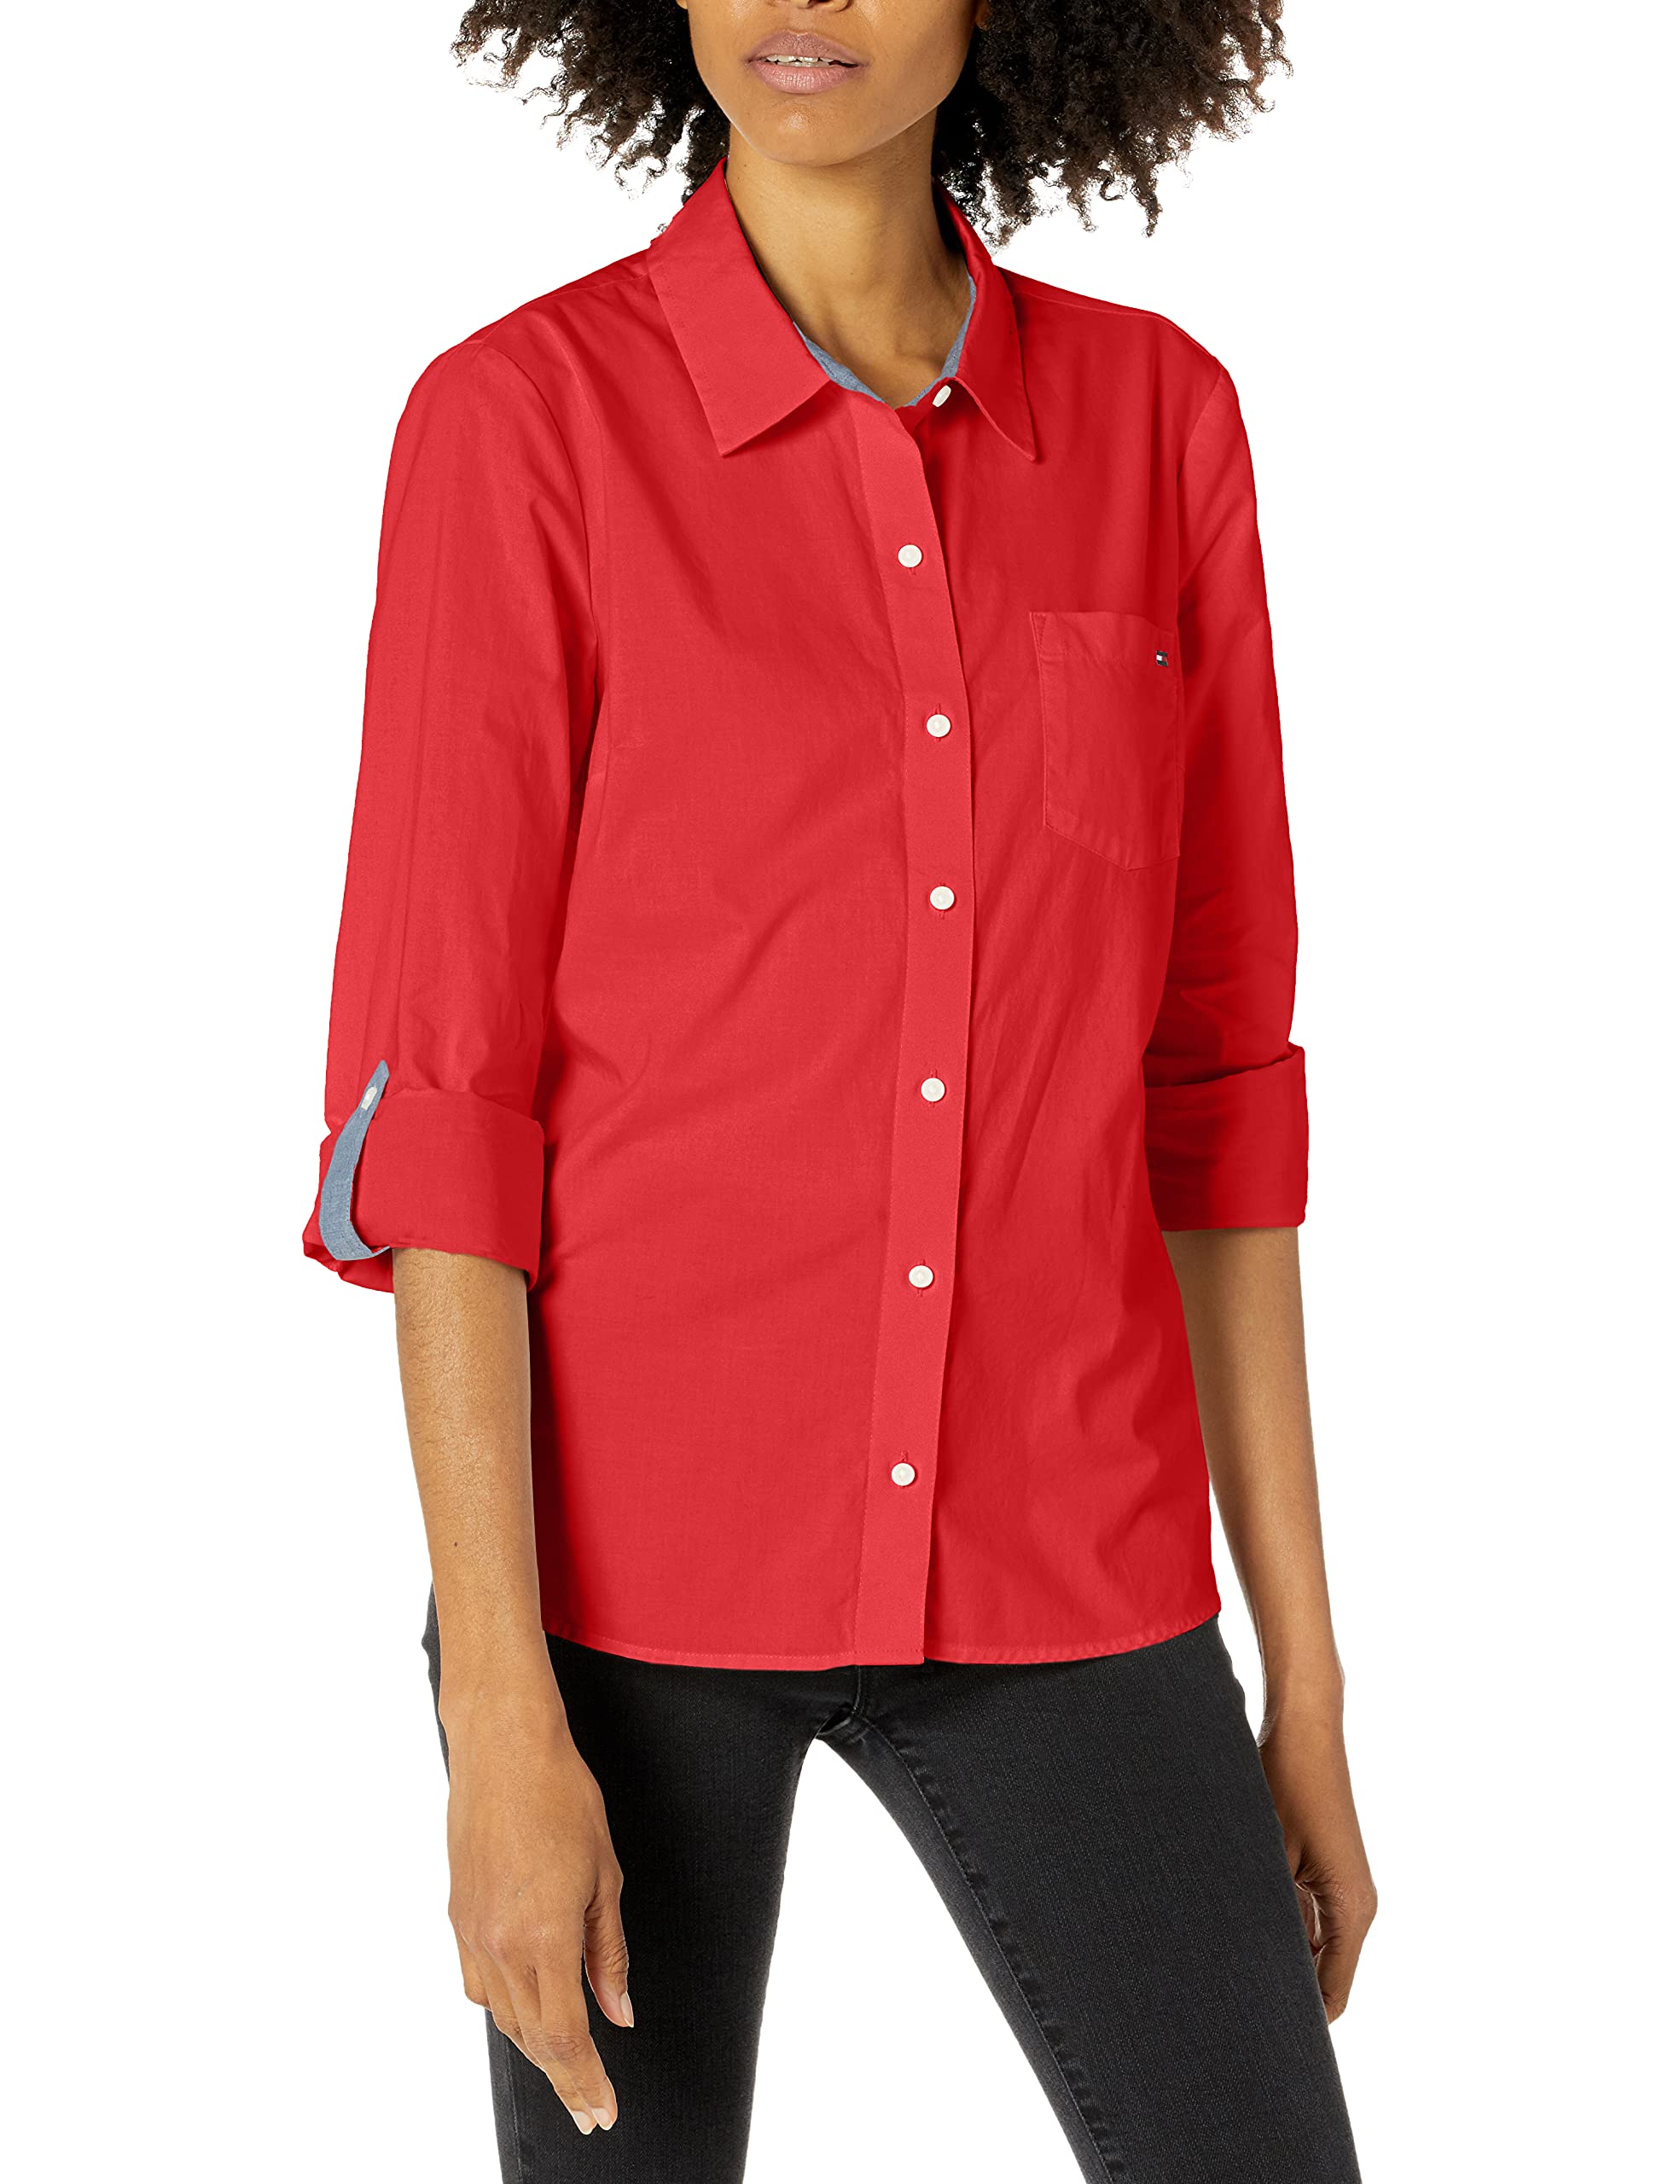 Tommy Hilfiger Button Collared Long Shirts for Women with Adjustable Sleeves